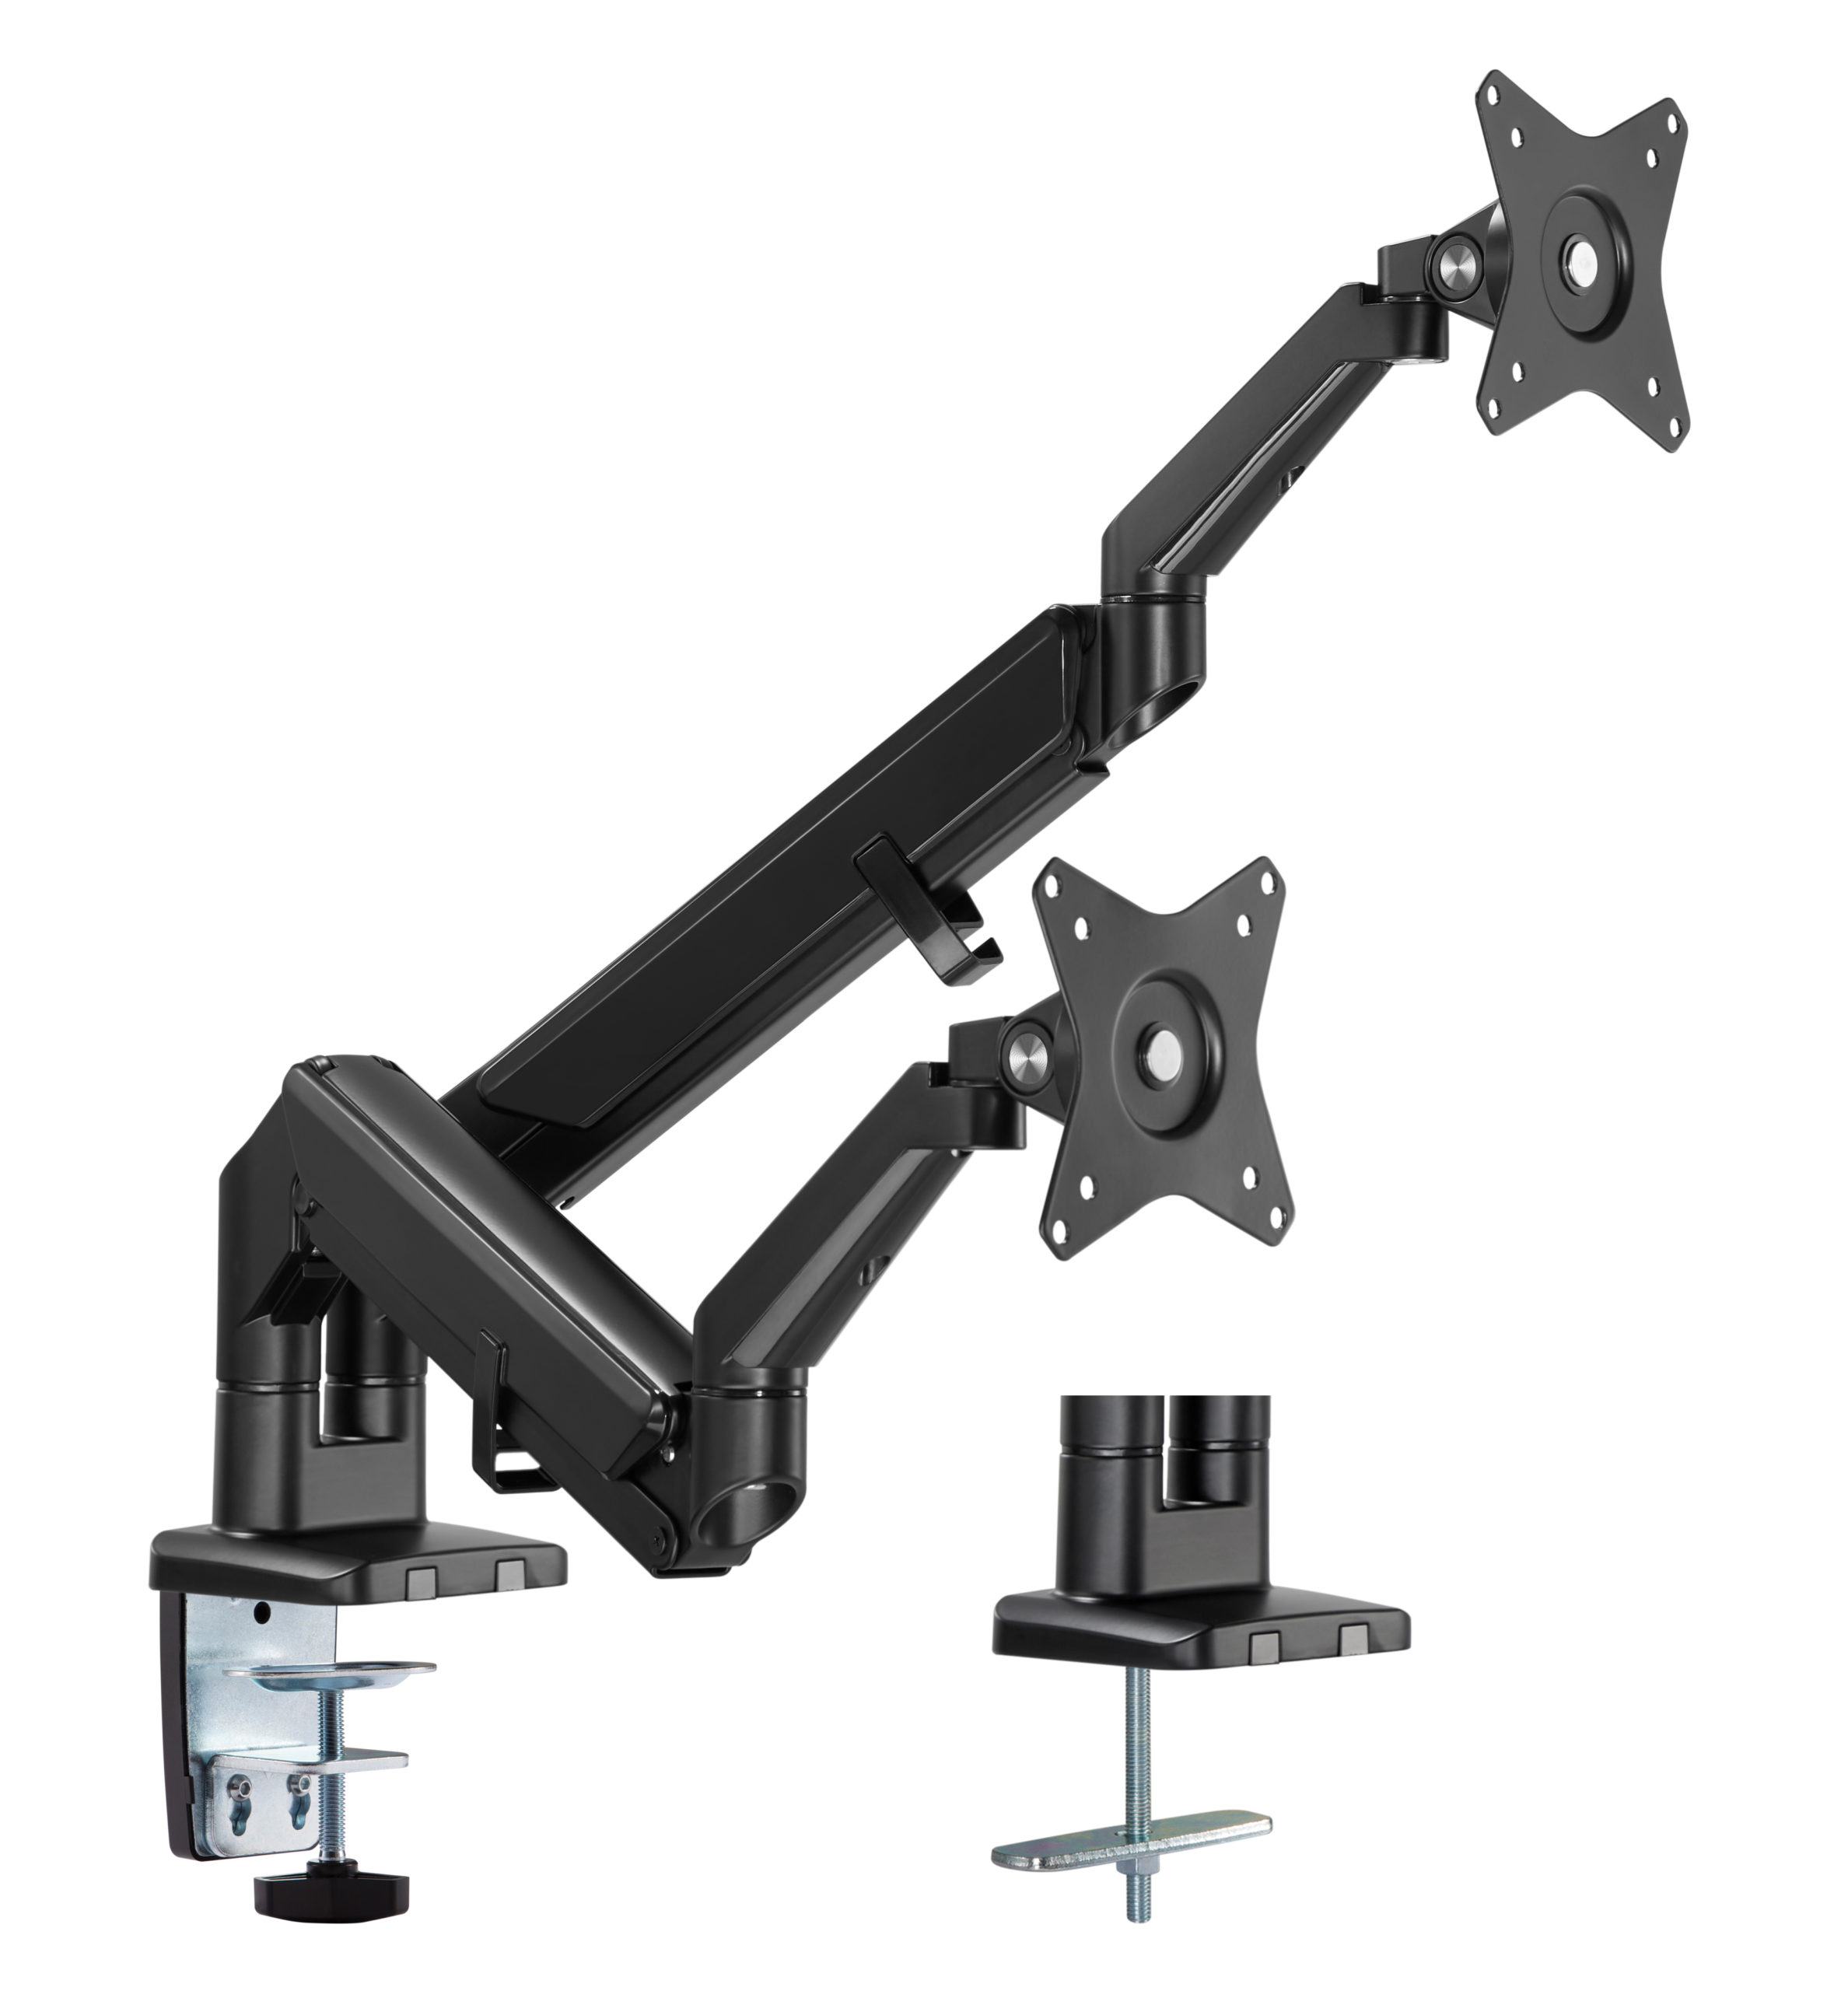 Dual Monitor Arm for Standing Desk